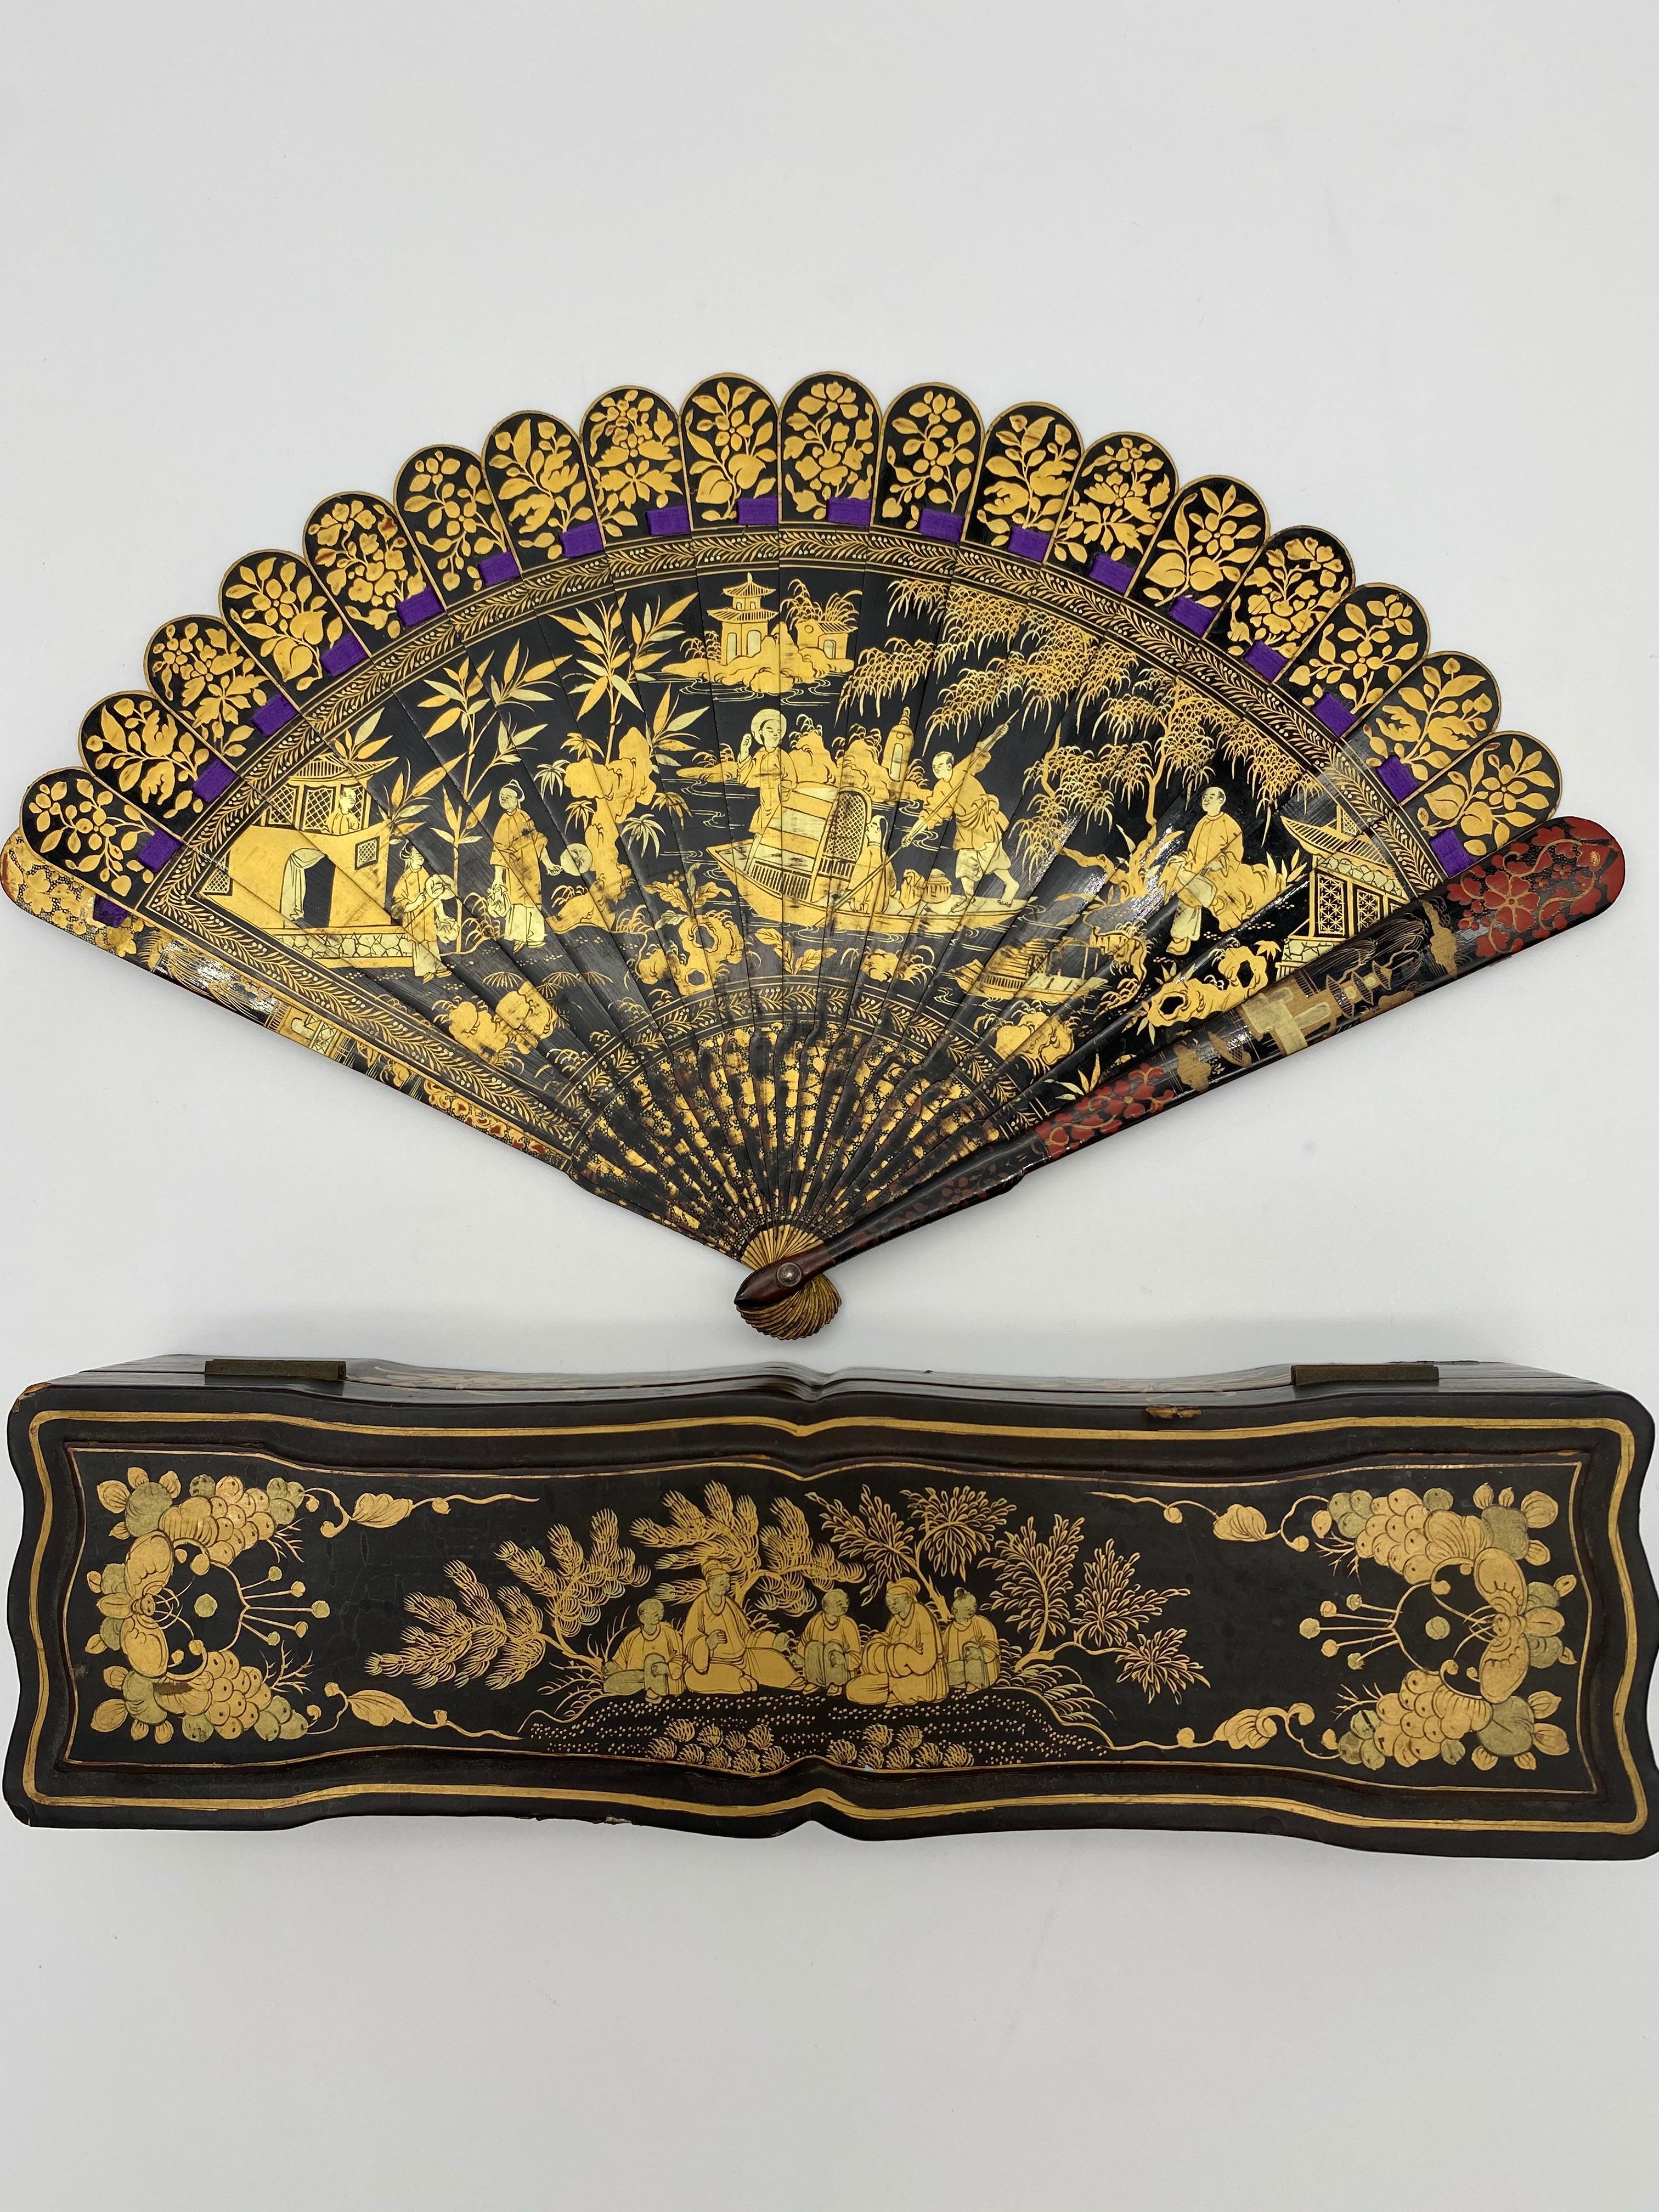 Antique Chinese Hand Painted Lacquer Scene Gilt Fan with Lacquer Box For Sale 6